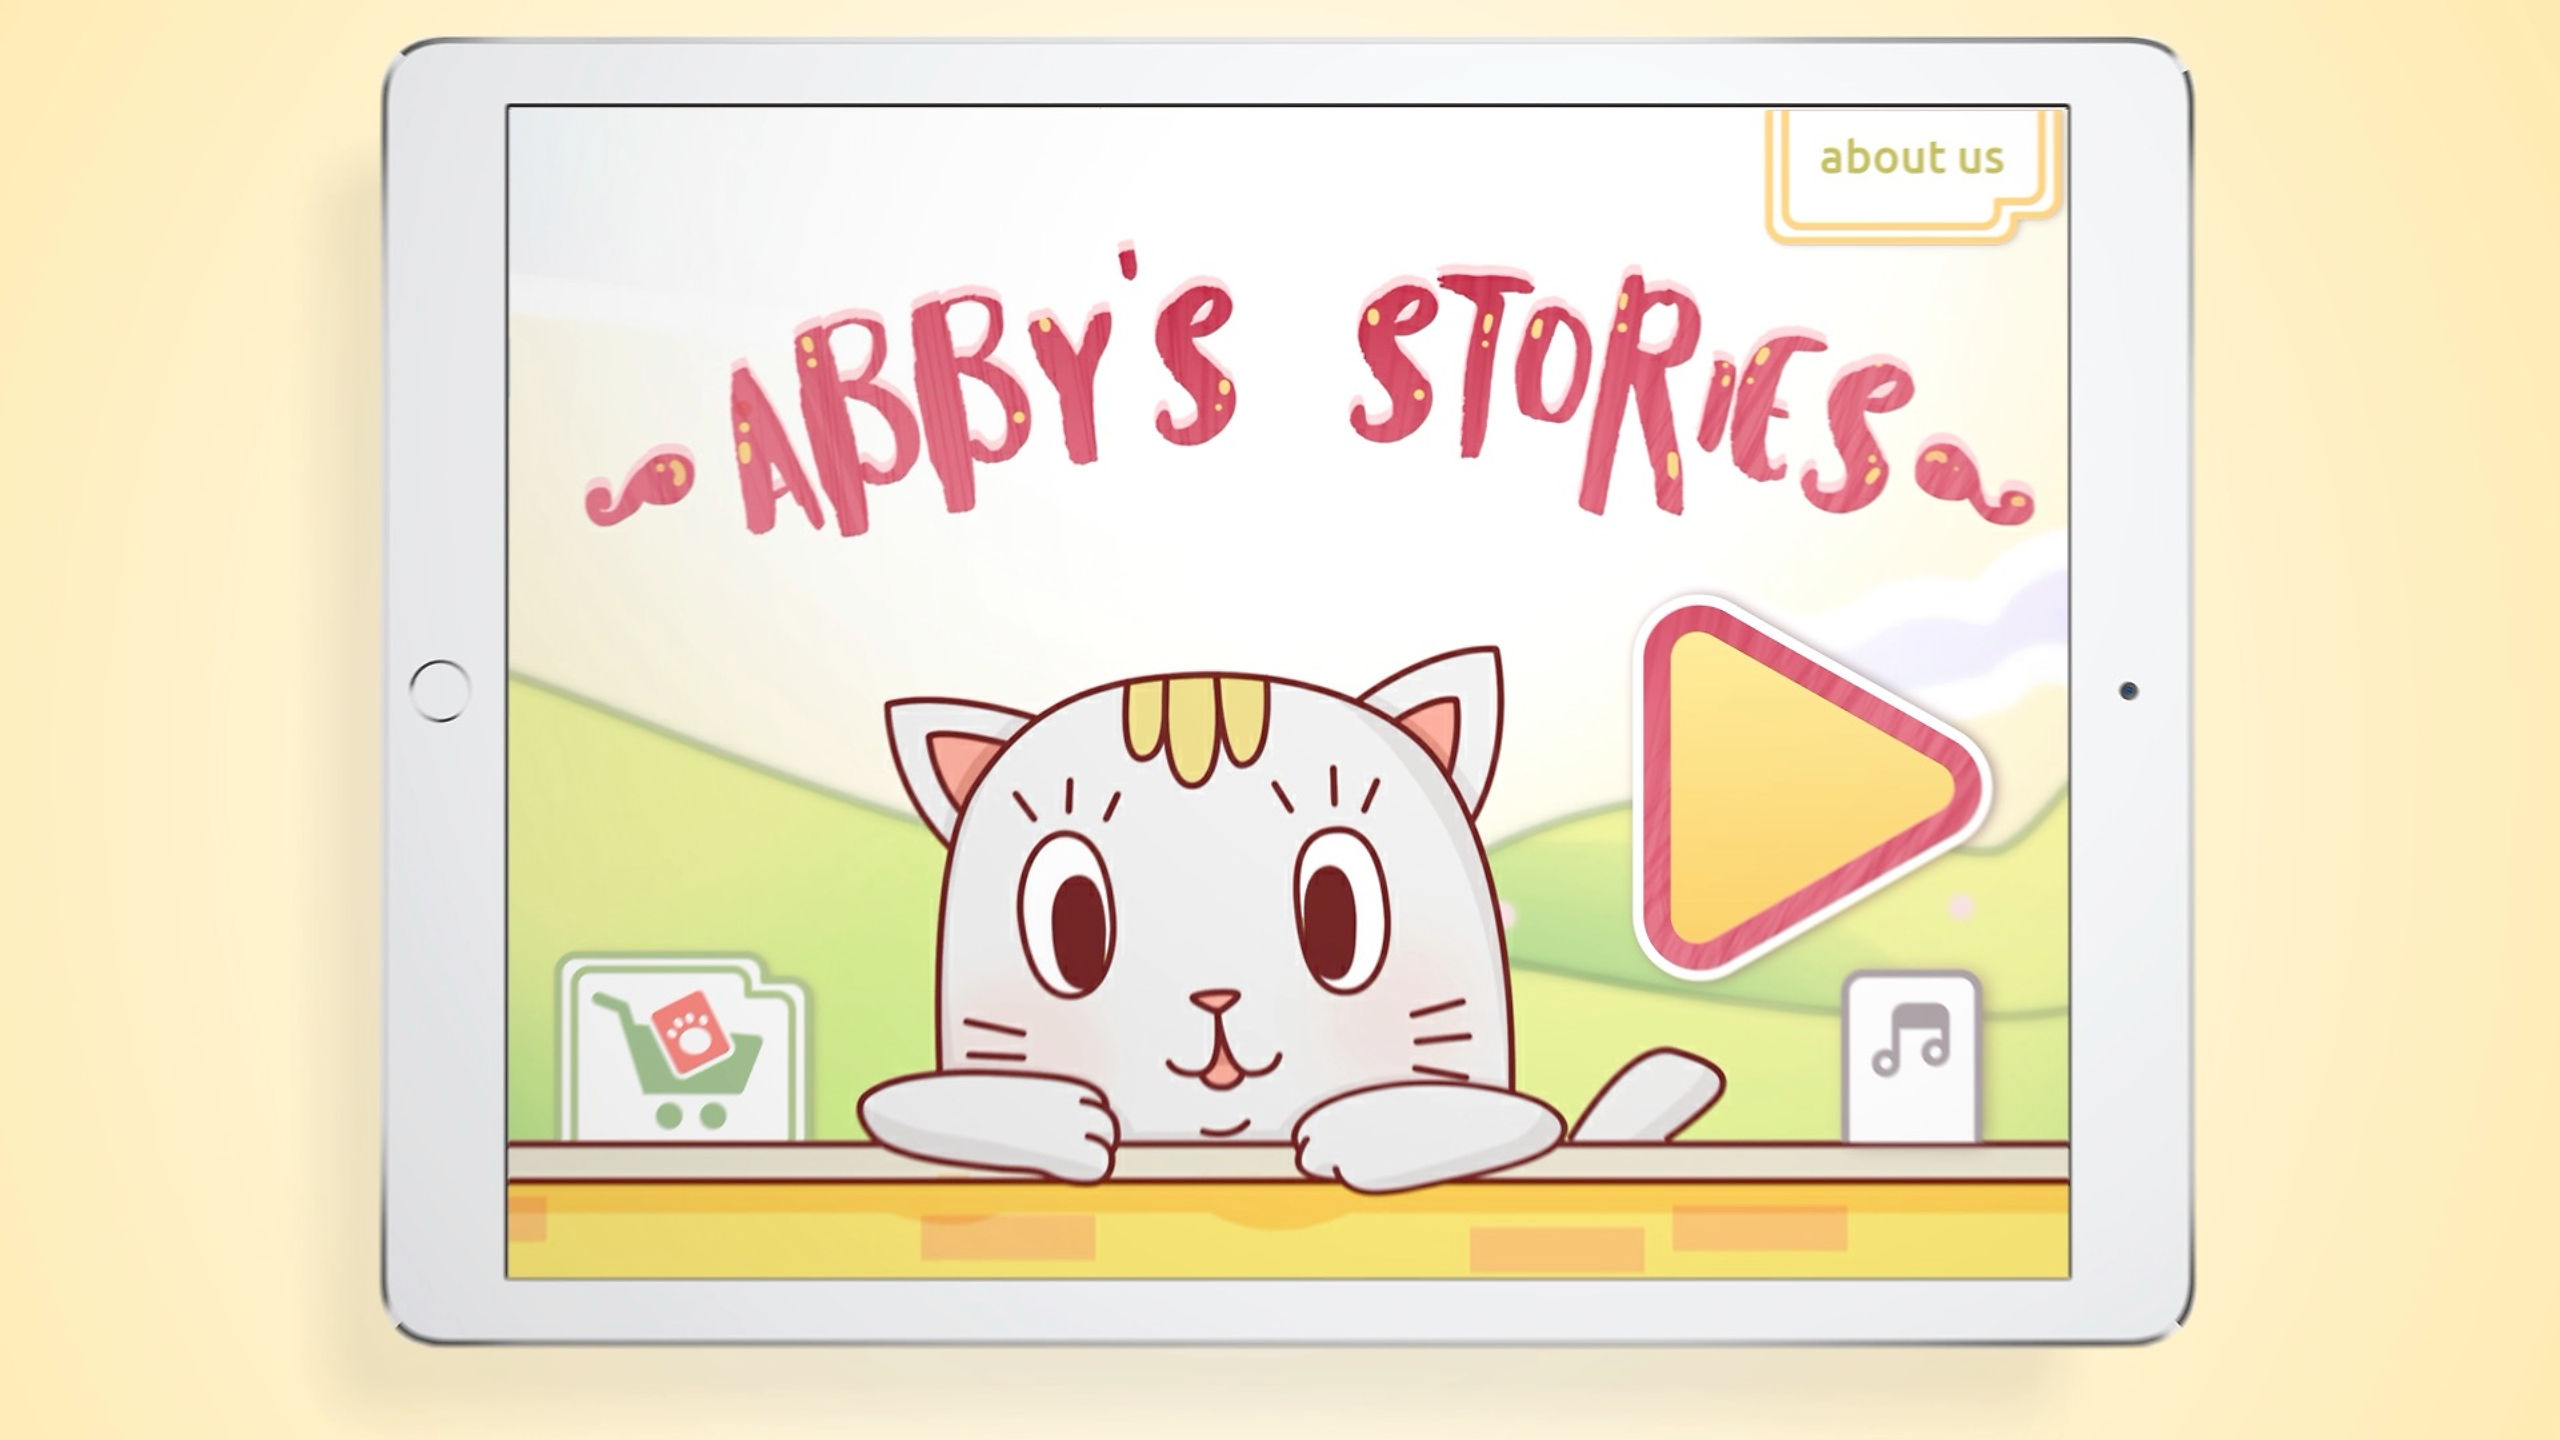 Abby's Stories